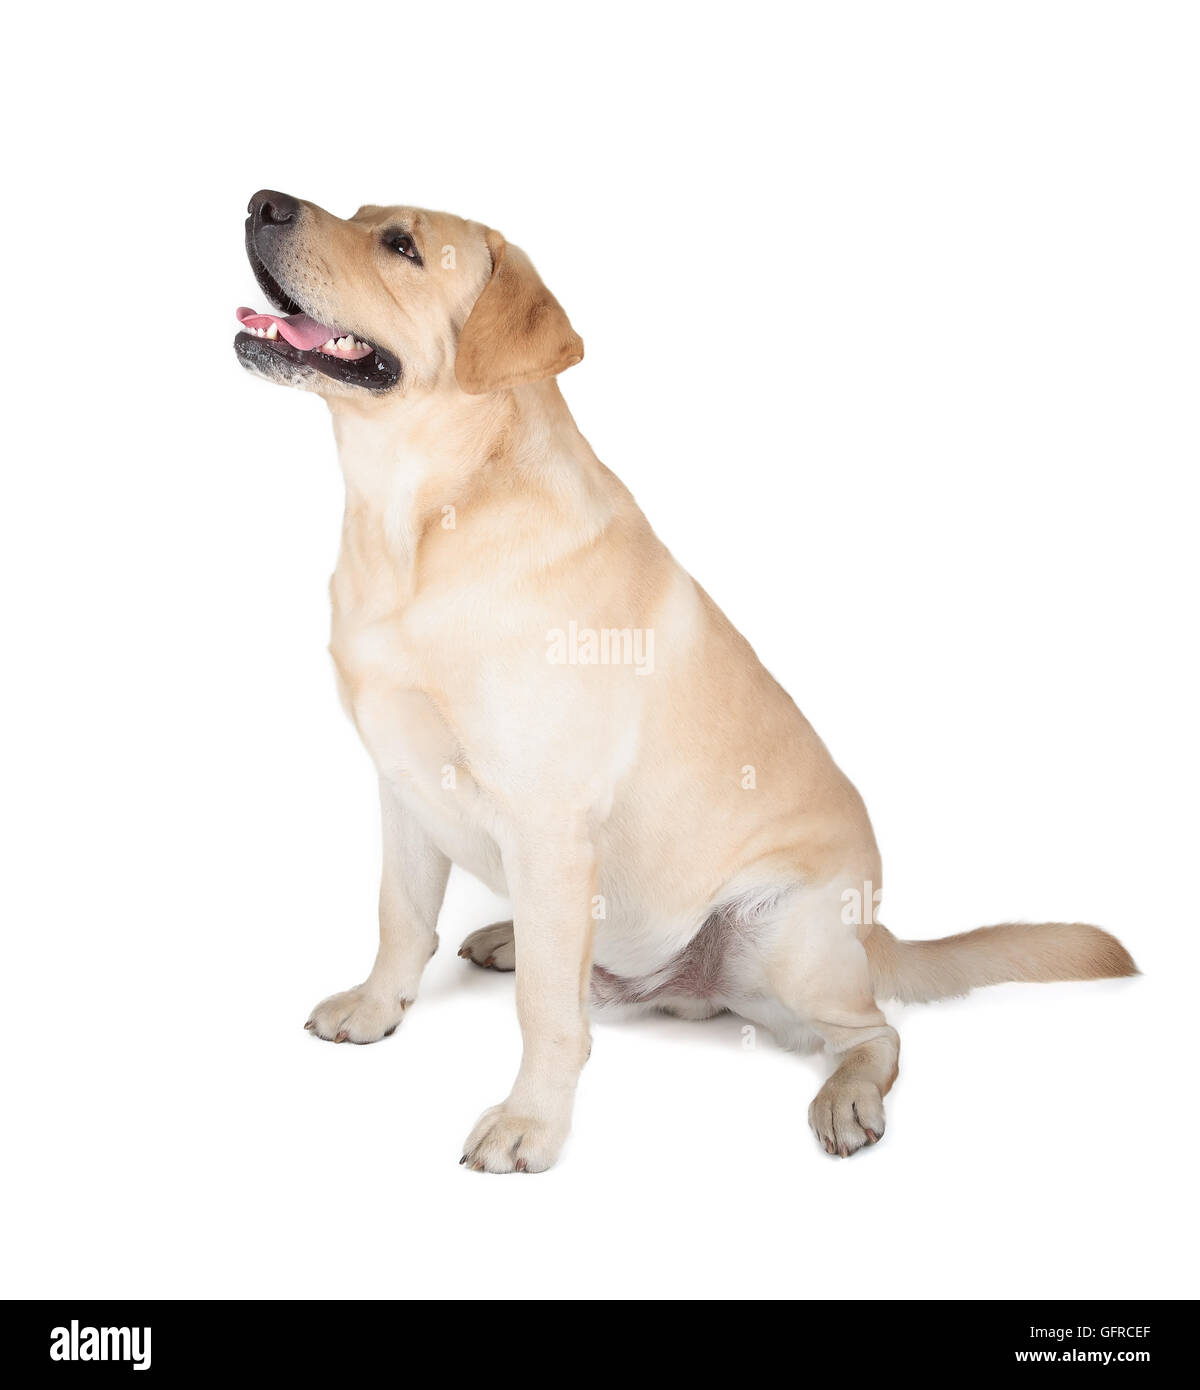 Cute Yellow Labrador Retriever dog sitting isolated on white Banque D'Images